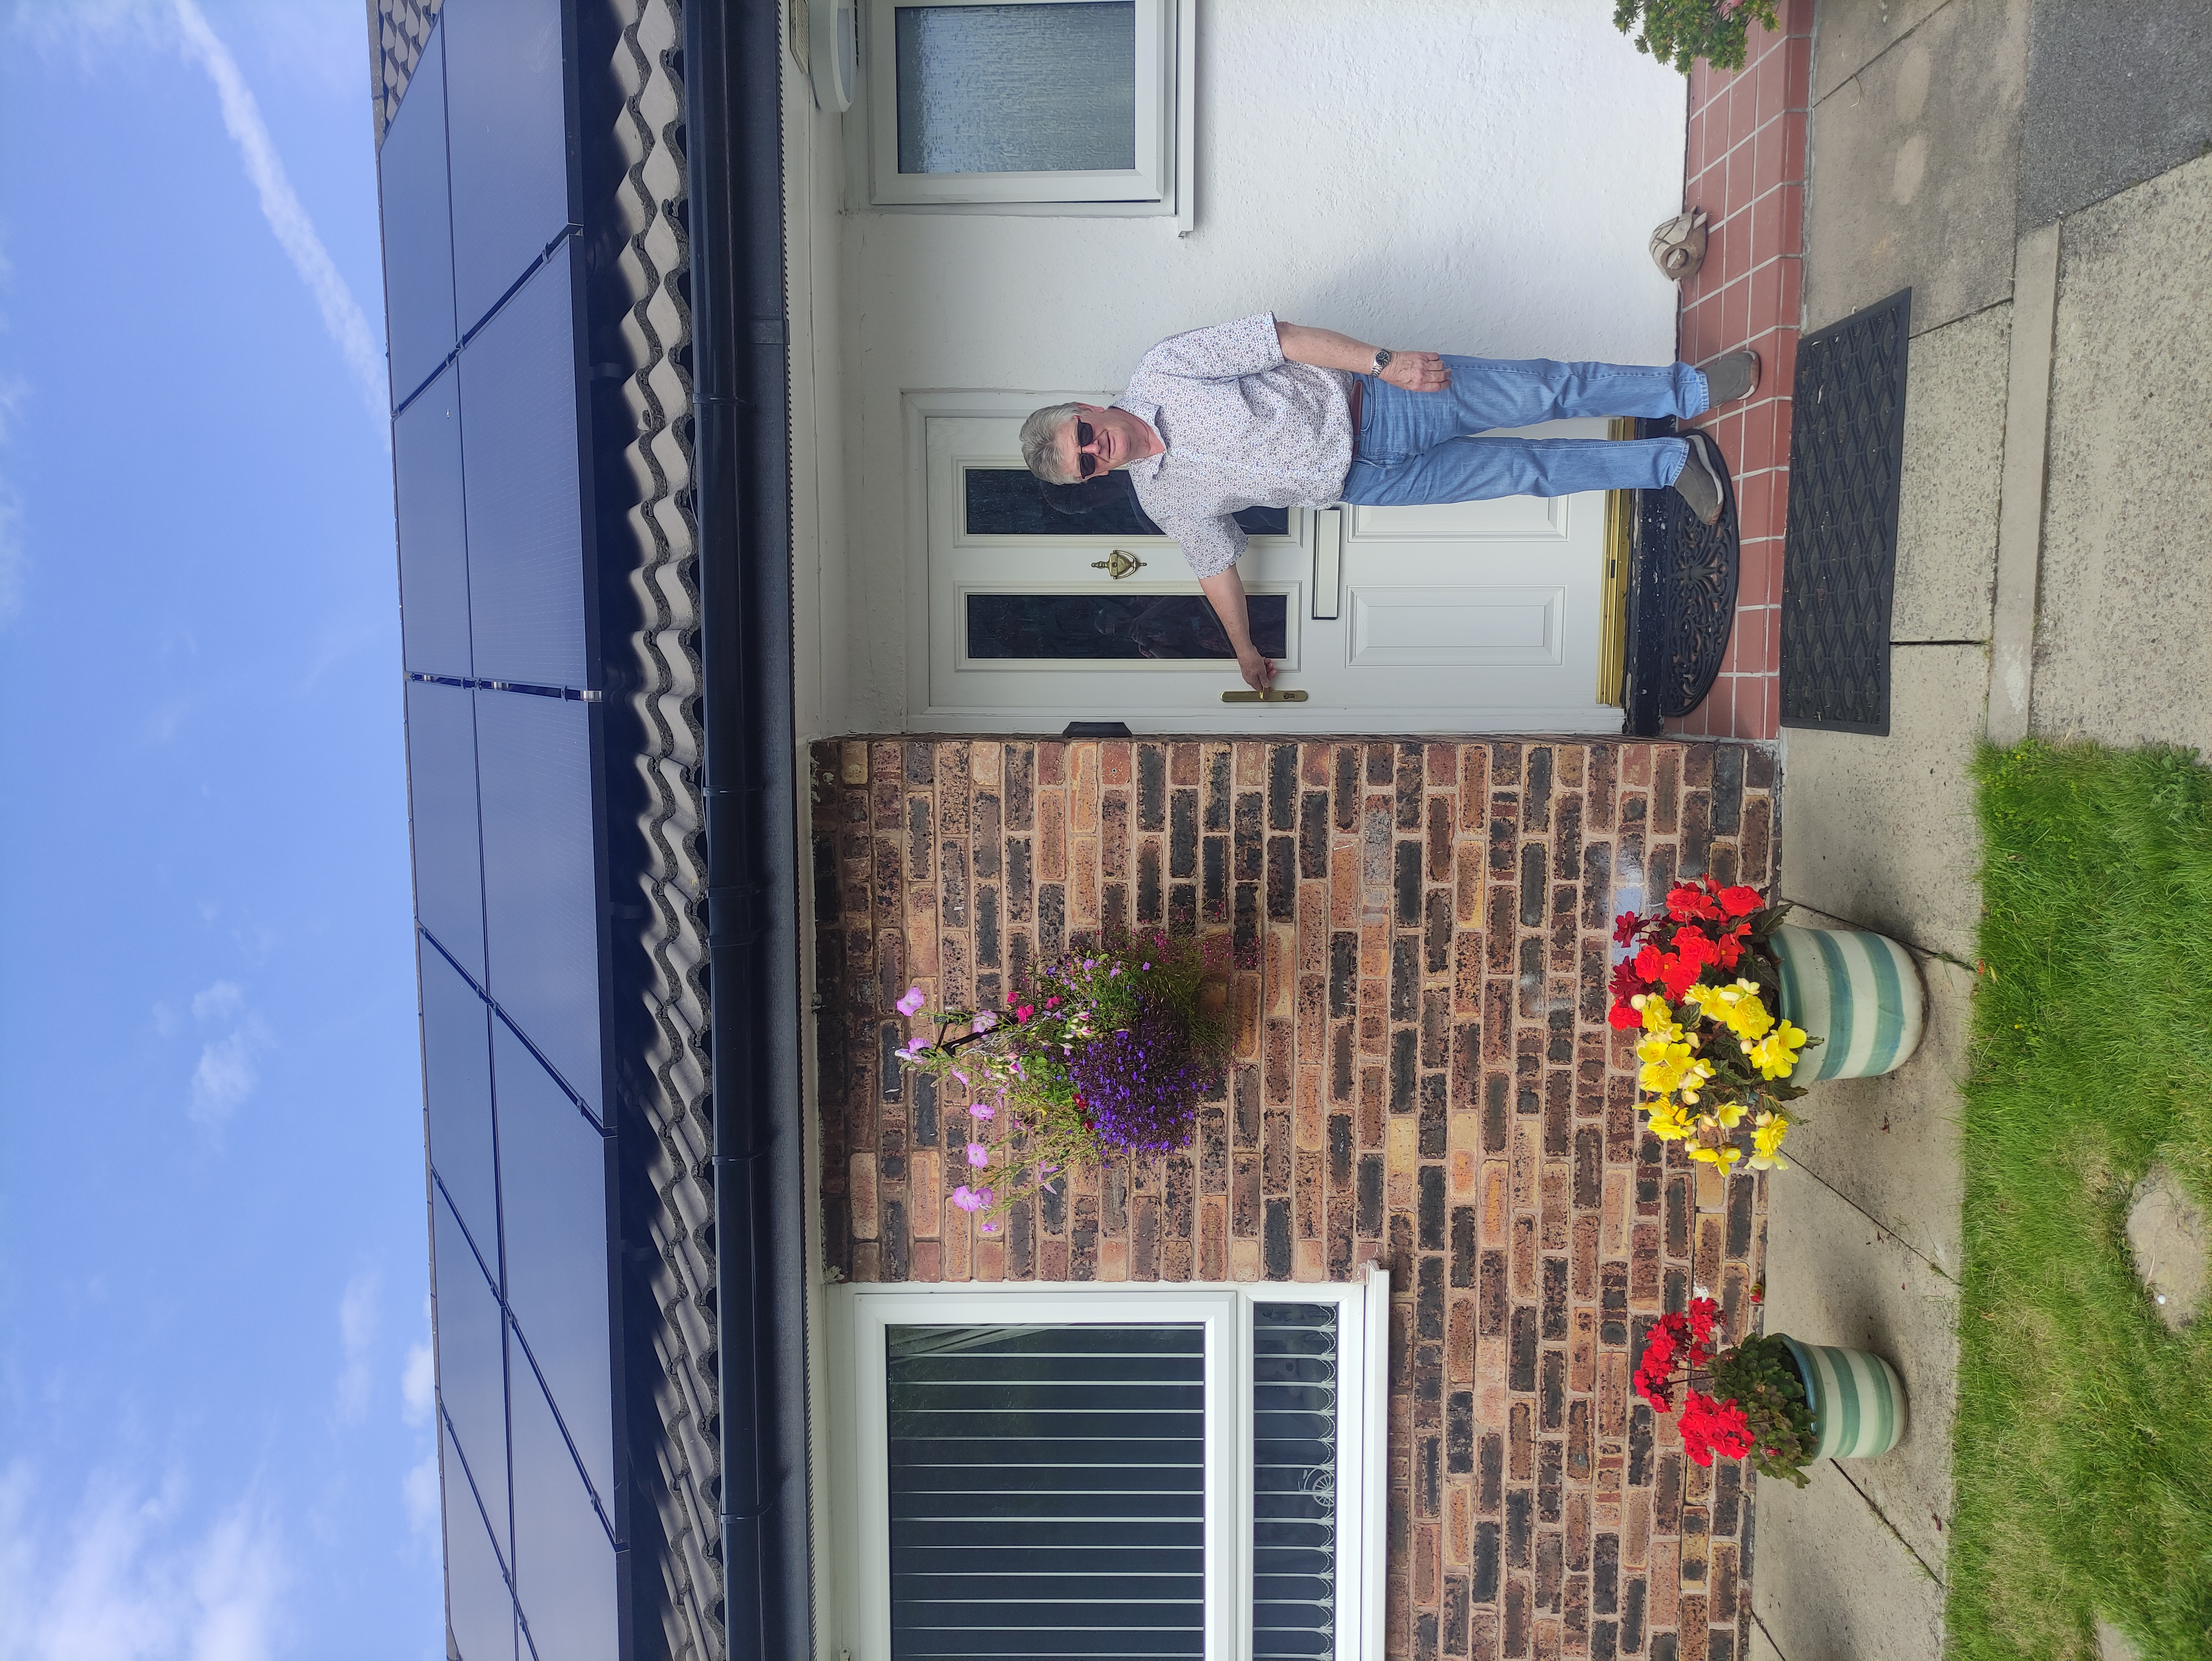 Our customer, smiling in front of his home. The solar panels are visible on his roof.